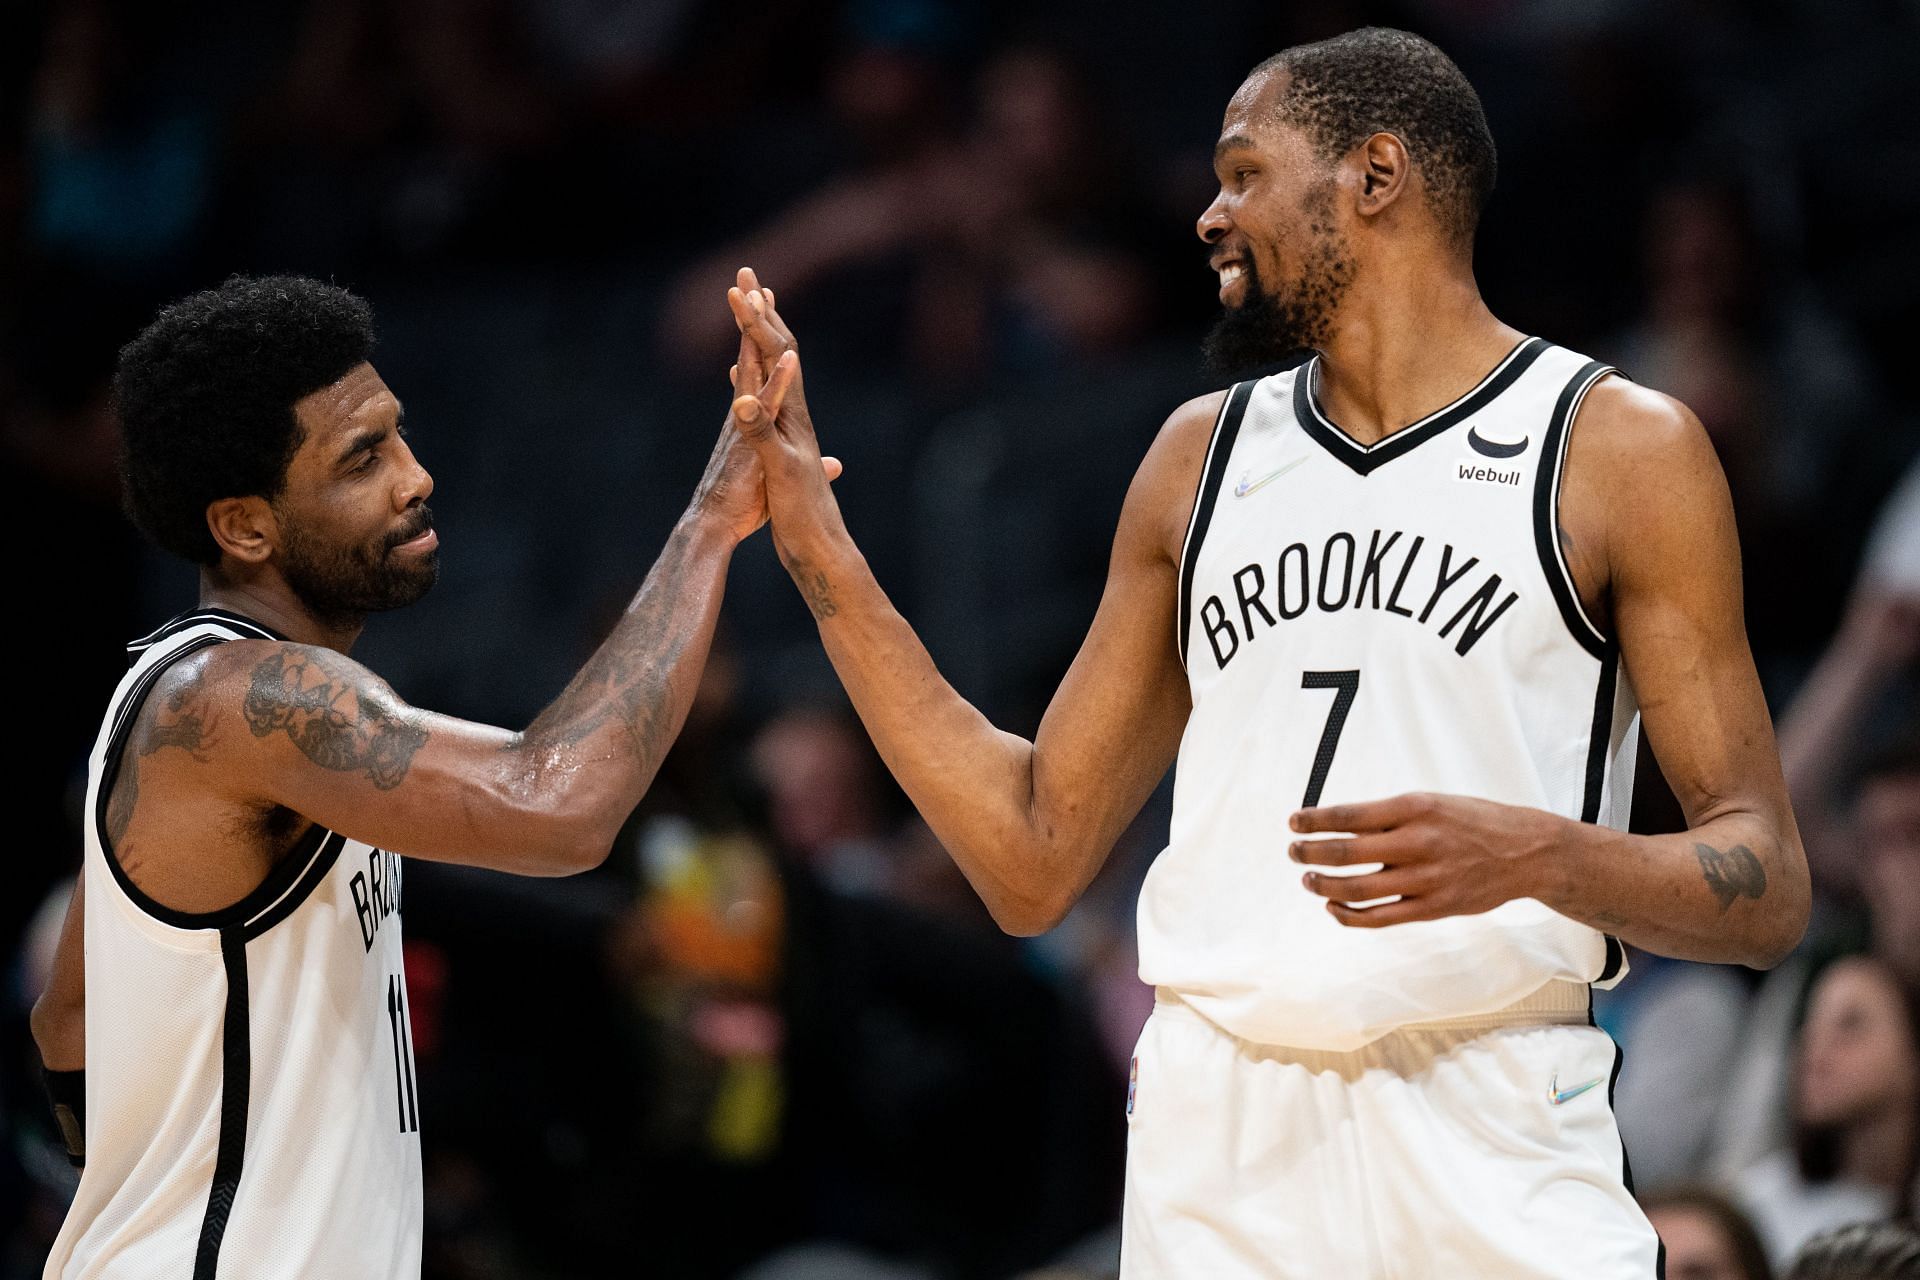 Kevin Durant #7 congratulates Kyrie Irving #11 of the Brooklyn Nets